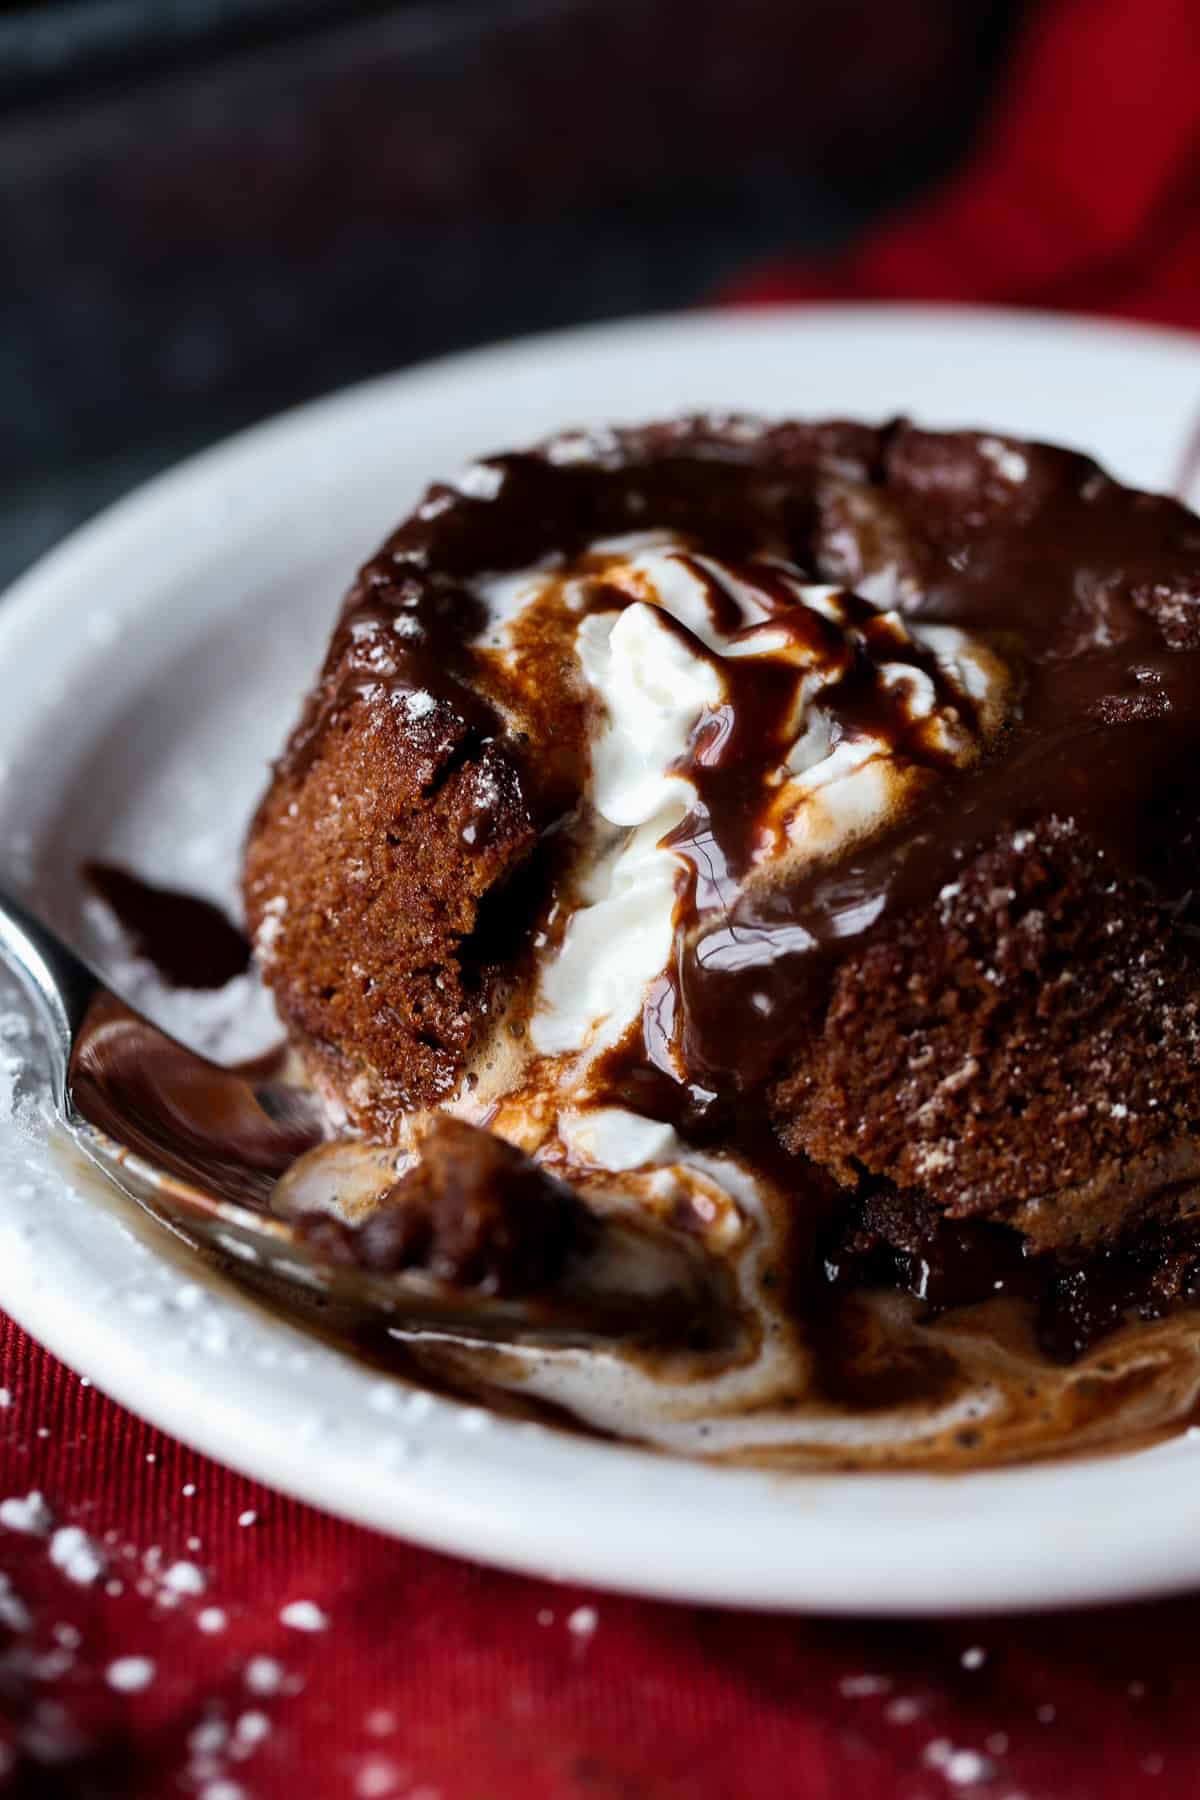 Chocolate Lava Cake topped with vanilla ice cream and overflowing with molten chocolate